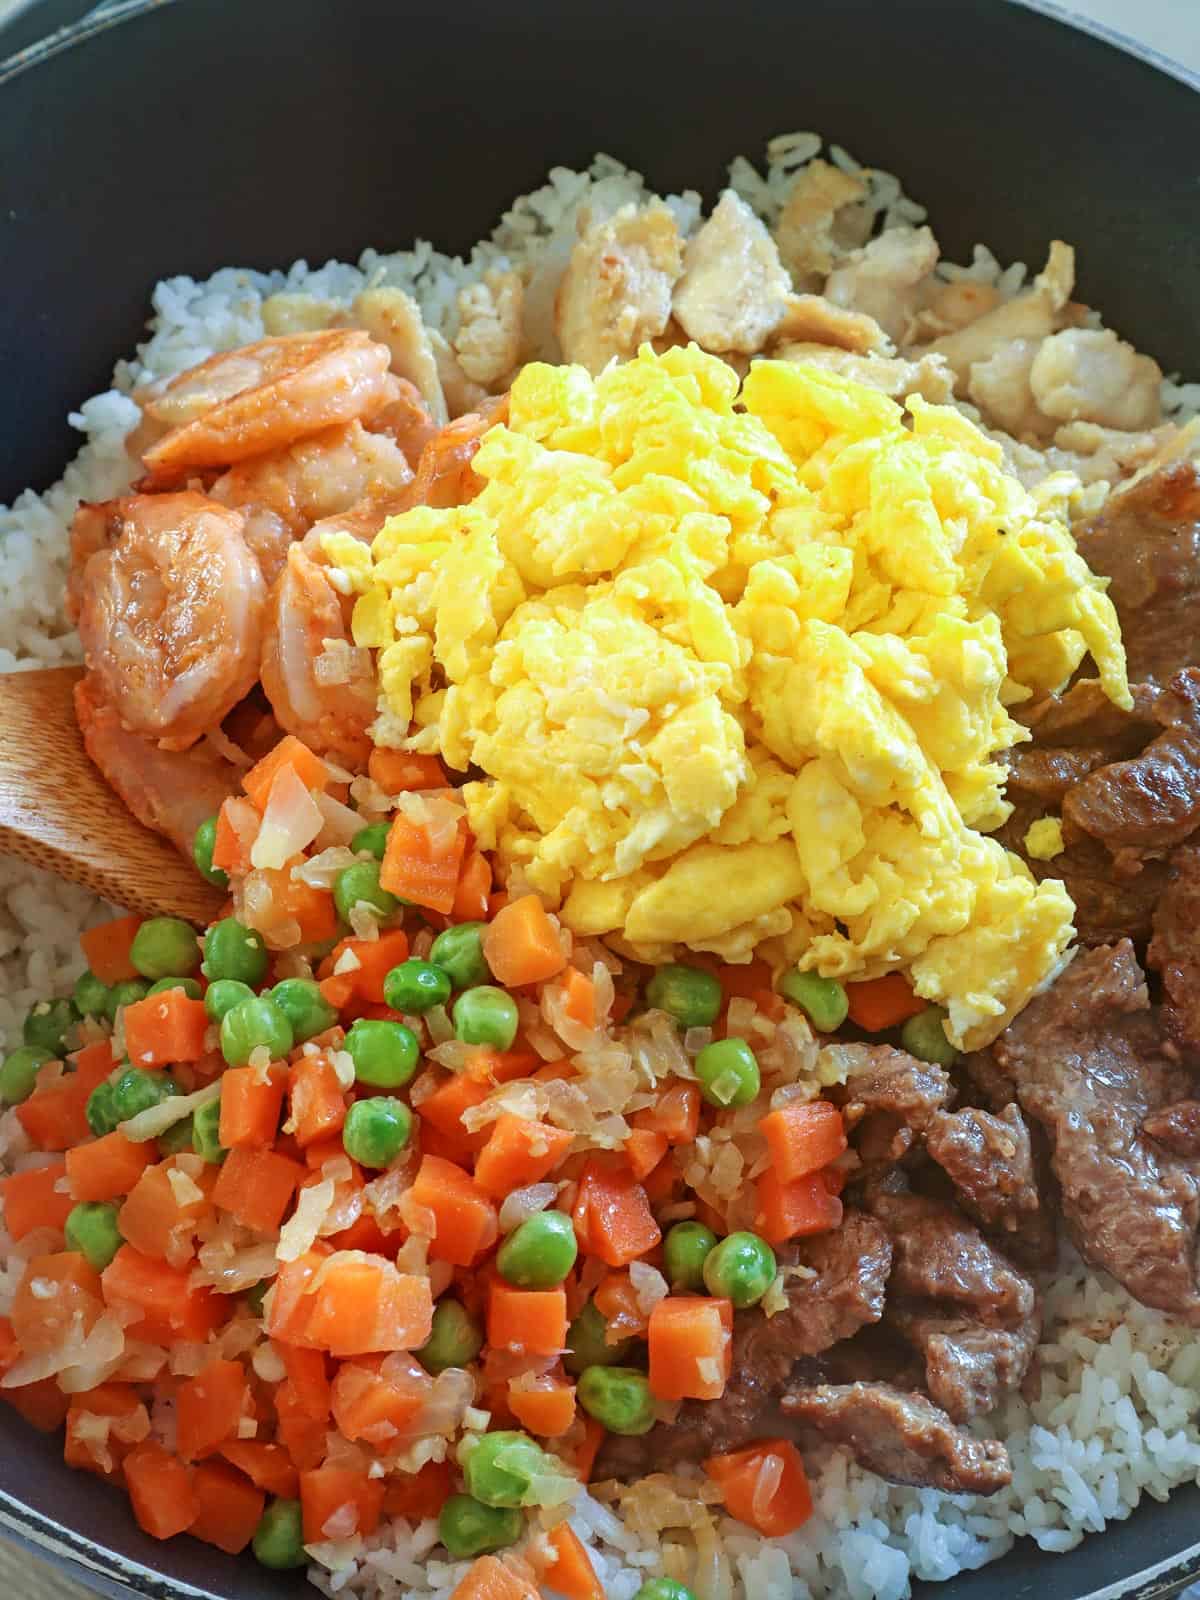 cooking stir-fried with shirmp, eggs, peas and carrots, chicken, and beef in a pan